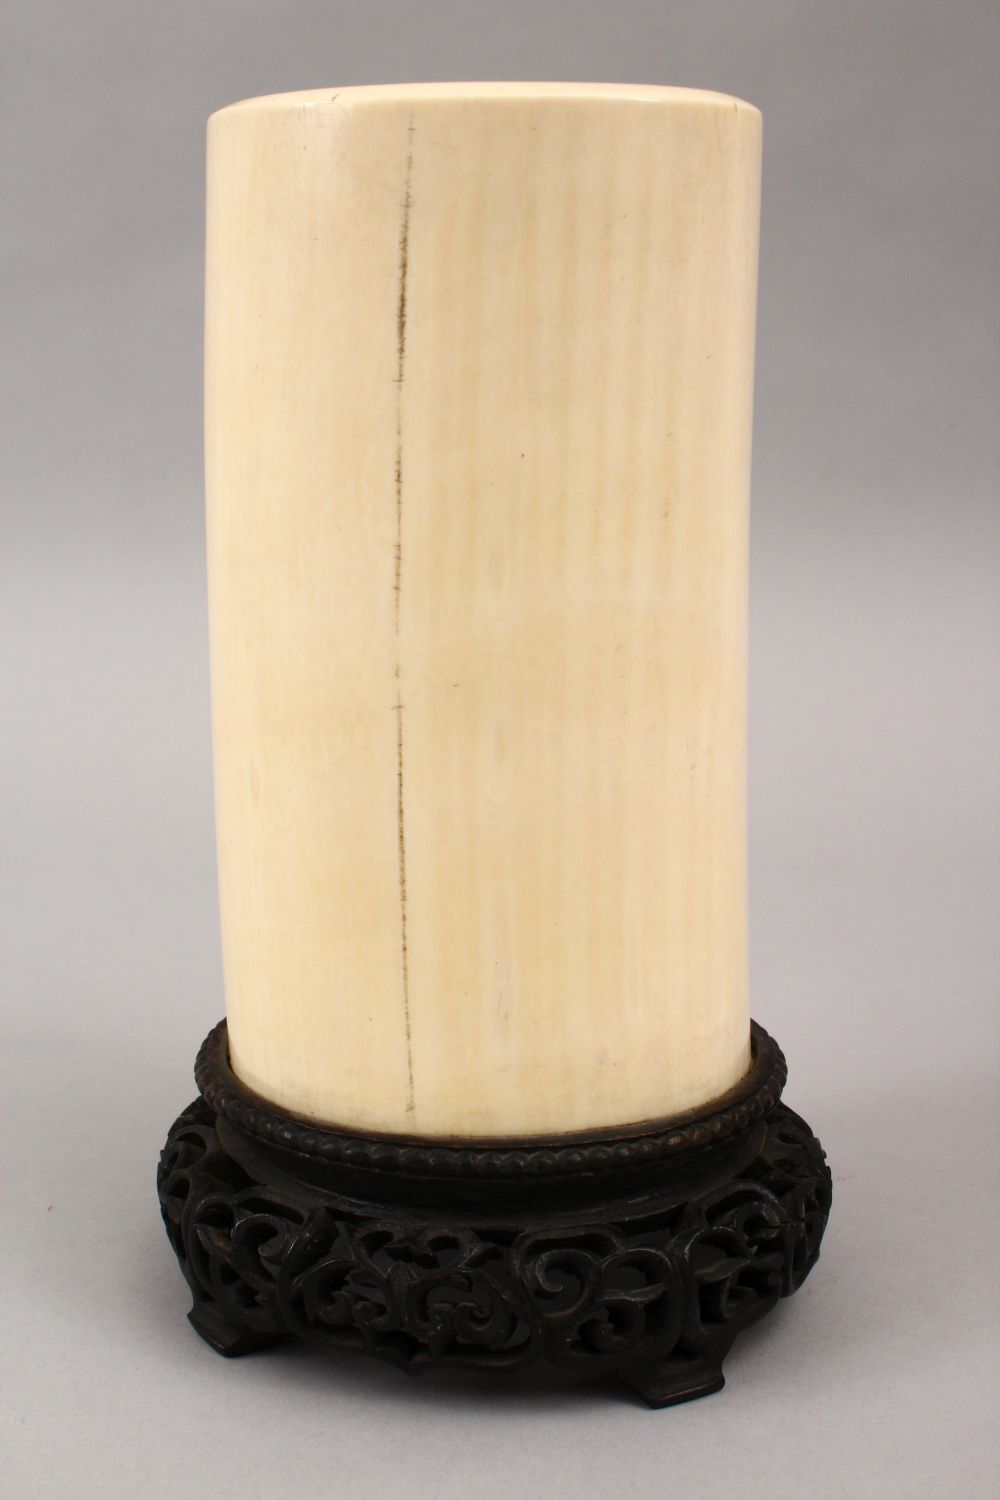 A GOOD CHINESE REPUBLIC PERIOD CARVED IVORY TUSK VASE ON STAND, the vase decorated with scenes of - Image 6 of 15